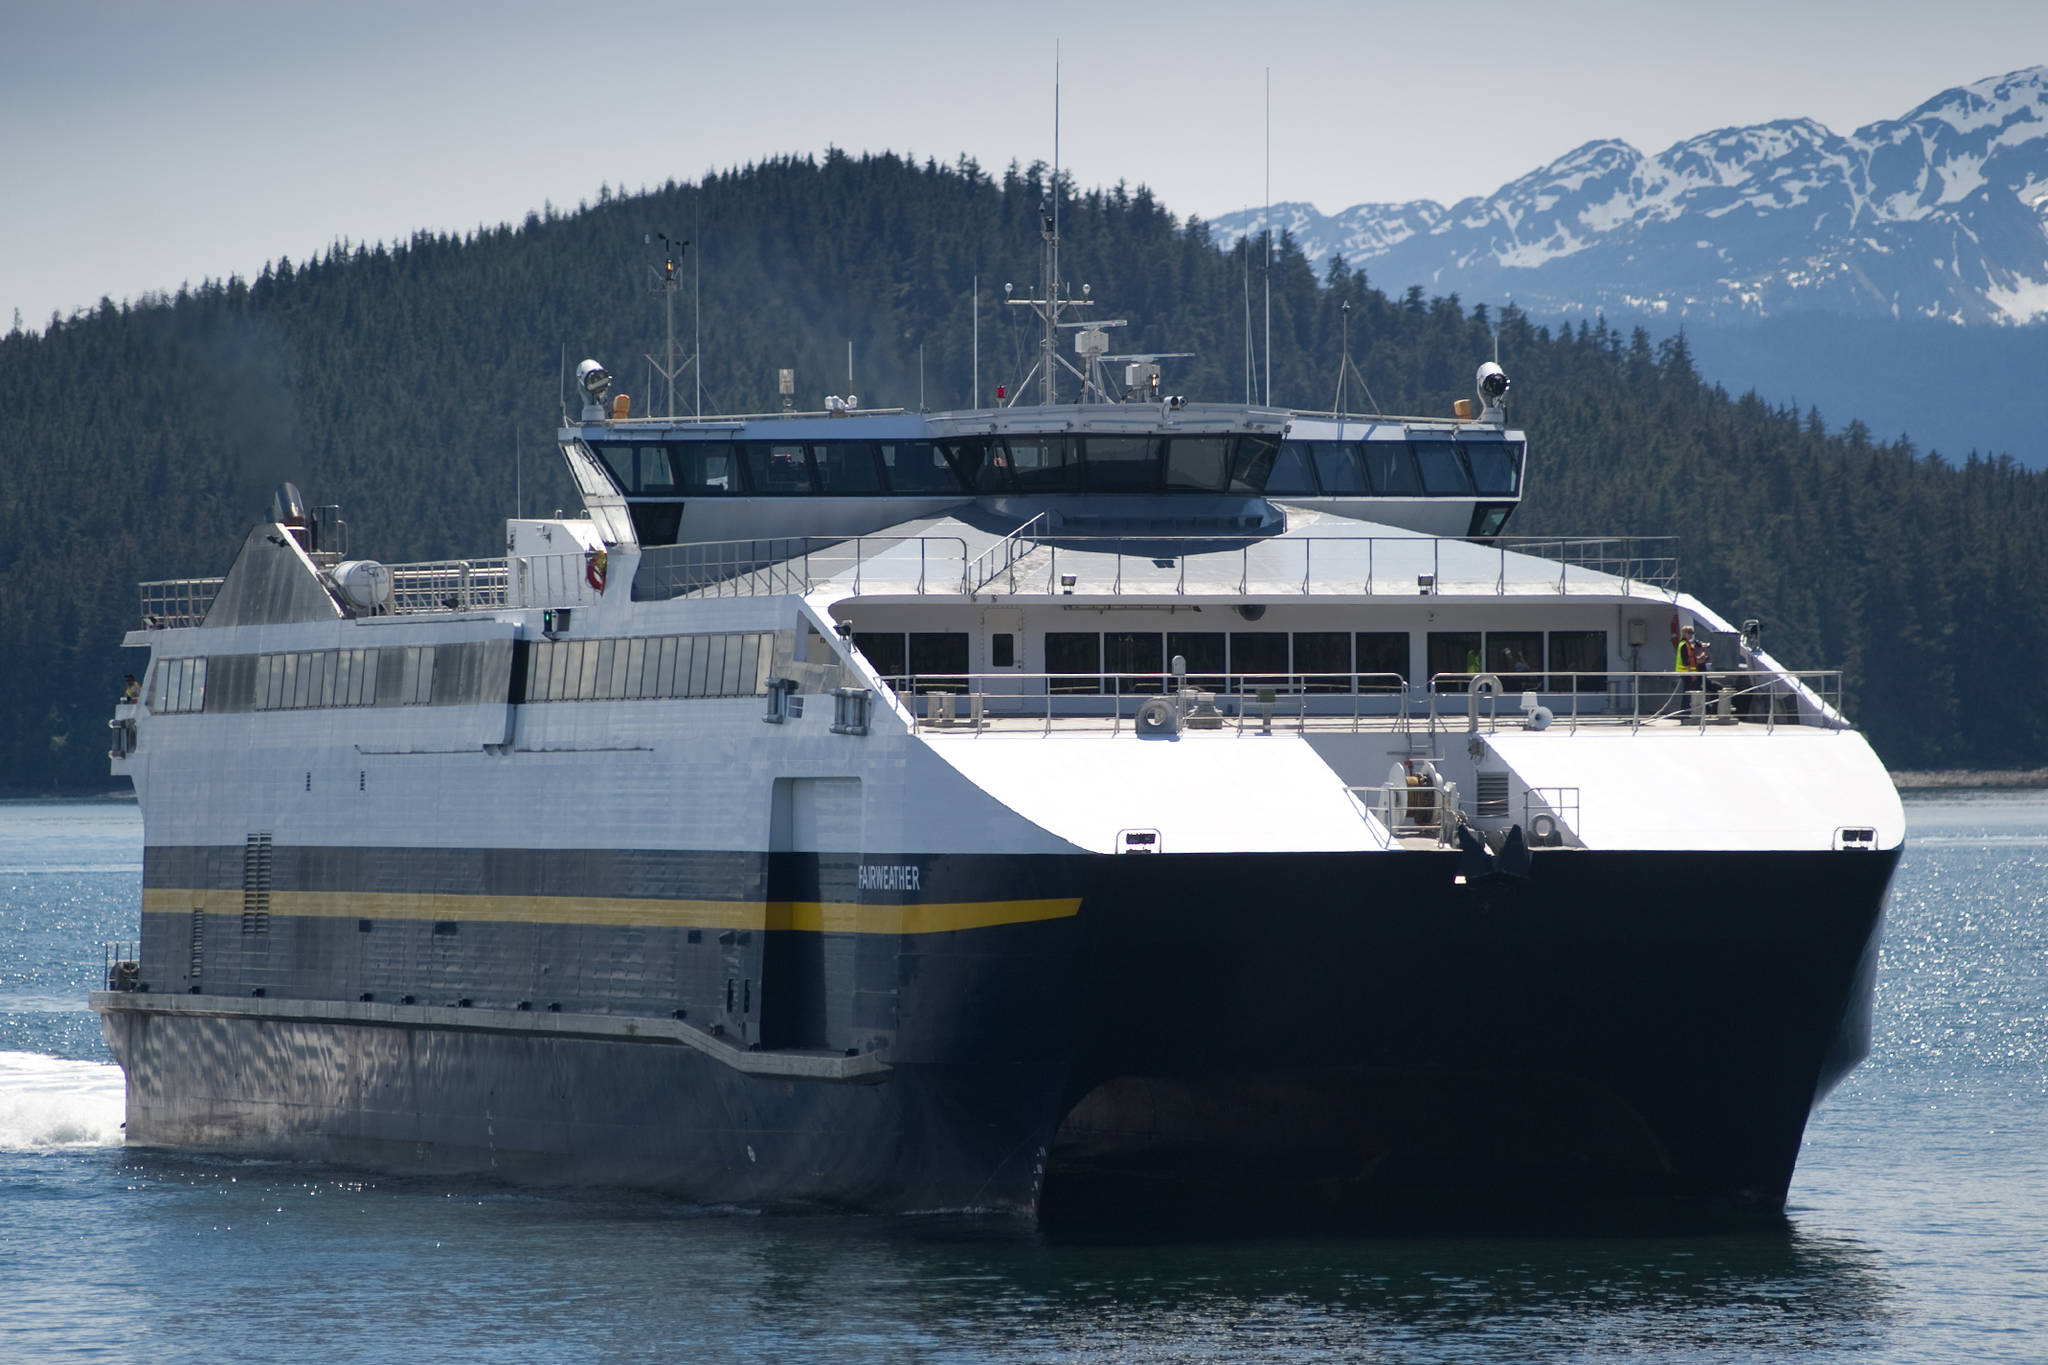 Opinion: Fan of fast ferry Fairweather sorry to see it shuttered